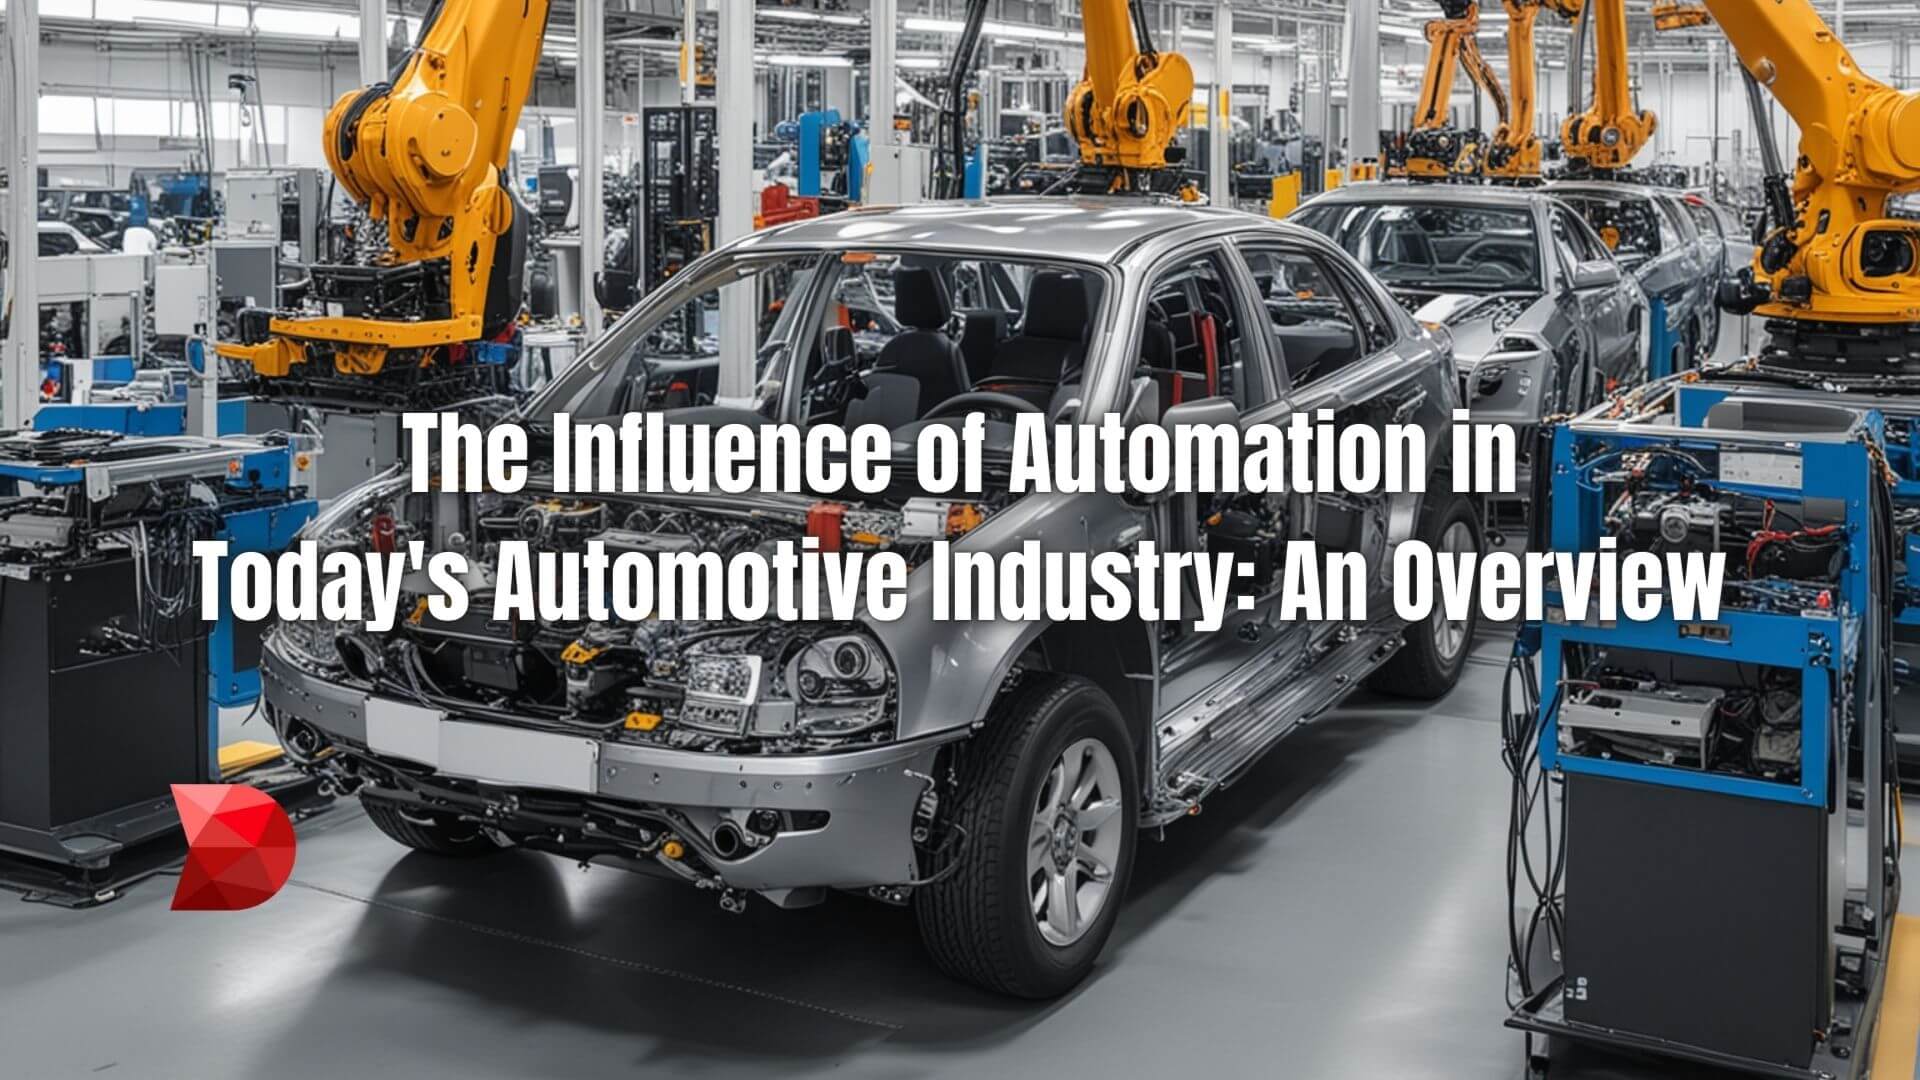 Navigate the complexities of automation in today's automotive sector with our guide. Learn about its influence and future implications.